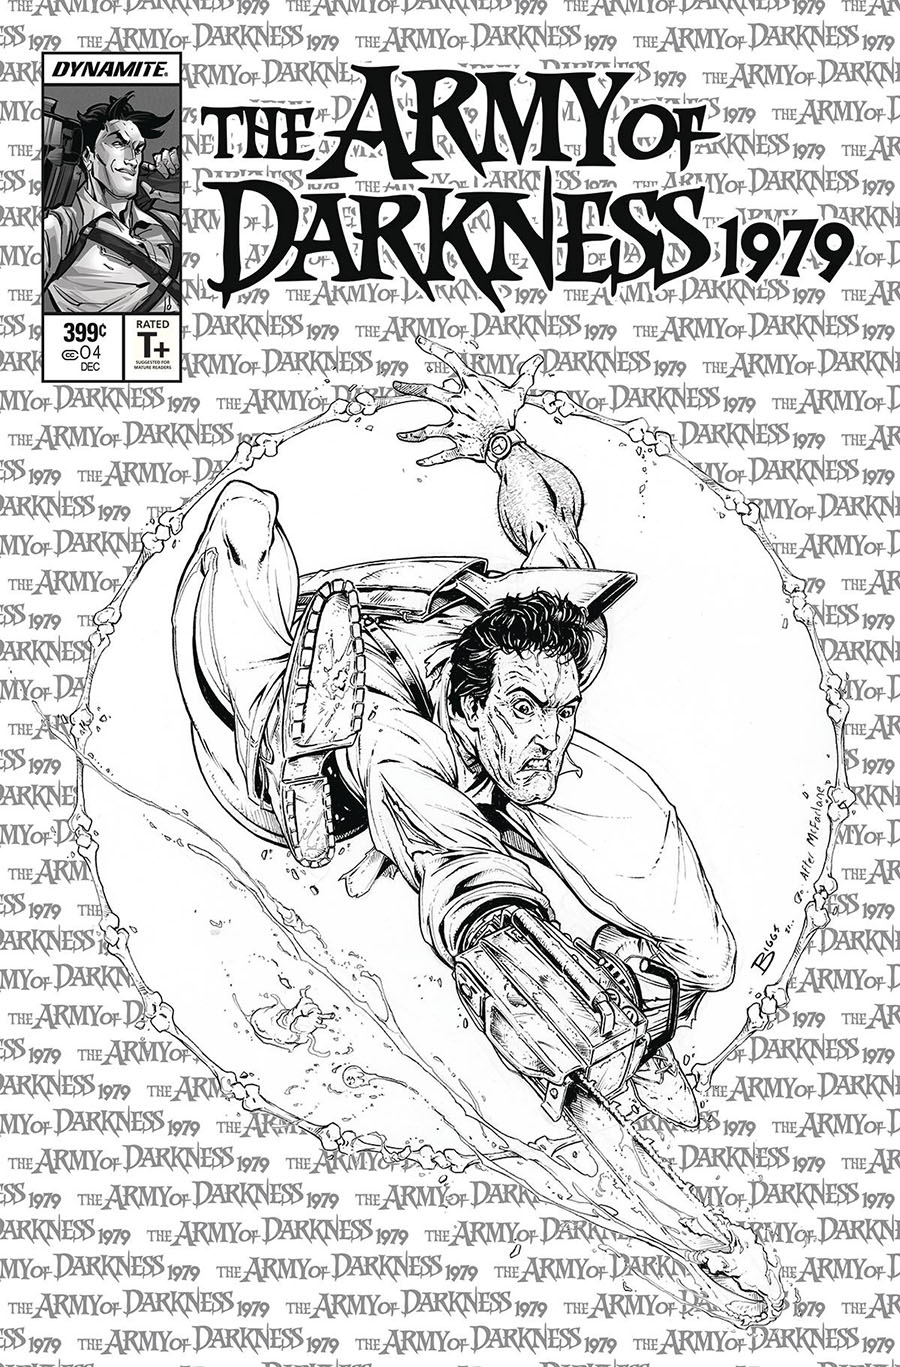 Army Of Darkness 1979 #4 Cover N Incentive Jamie Biggs Todd McFarlane Homage Line Art Cover